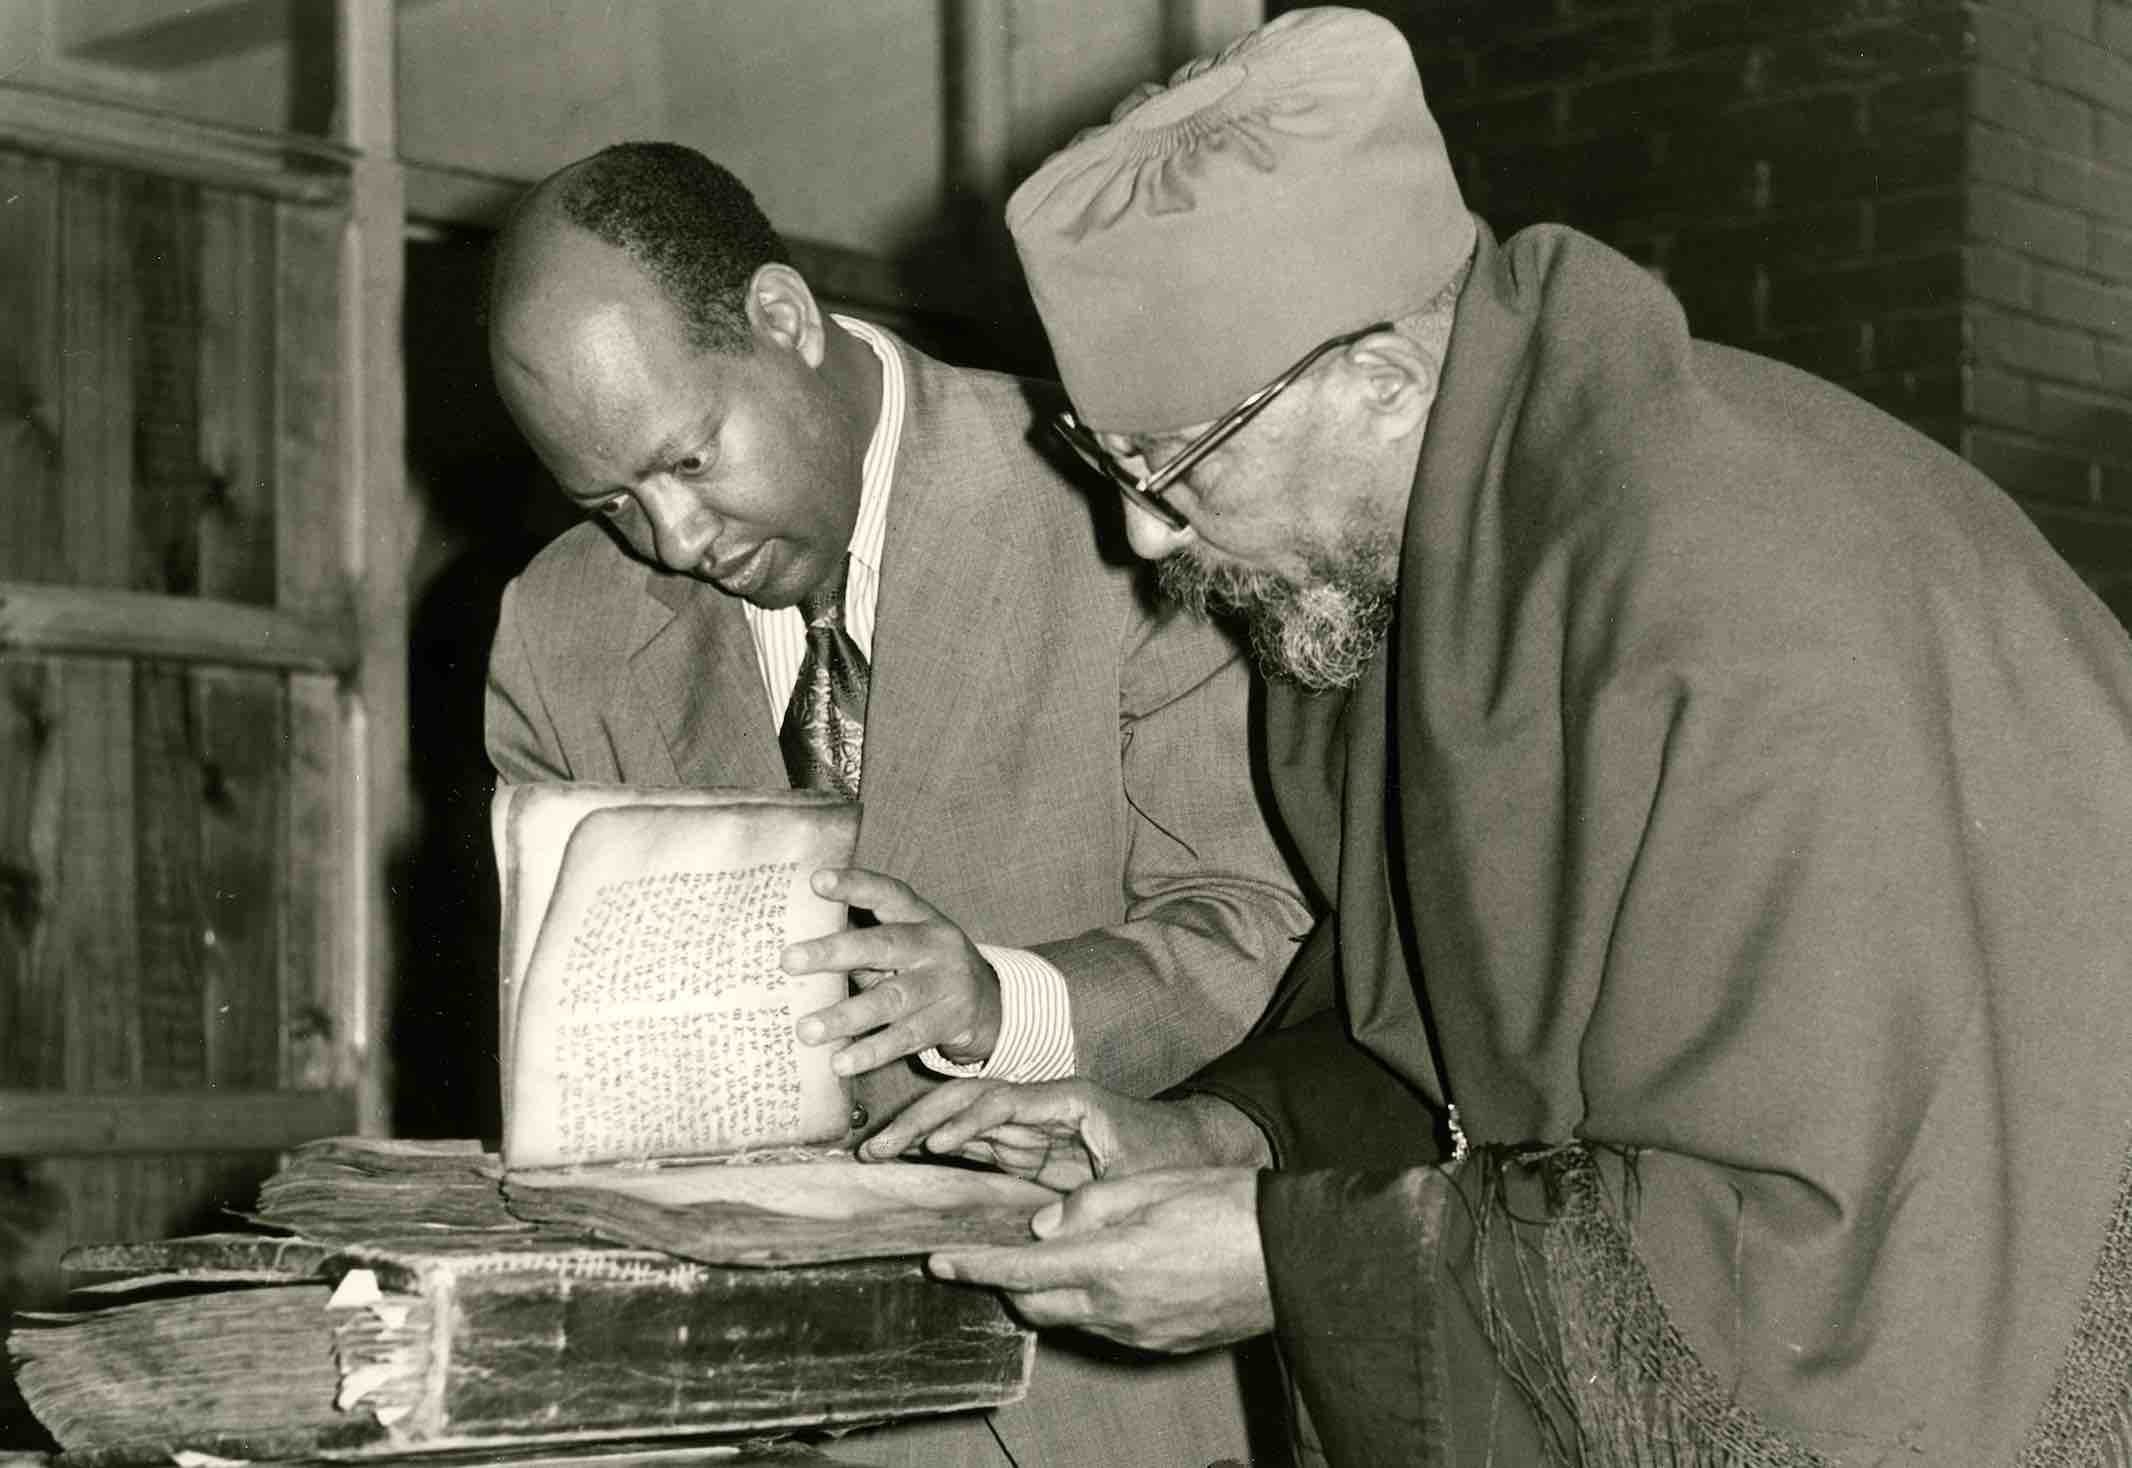 In 1974, Dr. Sergew Hable Selassie (left) shows an EMML manuscript to the patriarch of the Ethiopian church, Abuna Theophilos in Addis Ababa